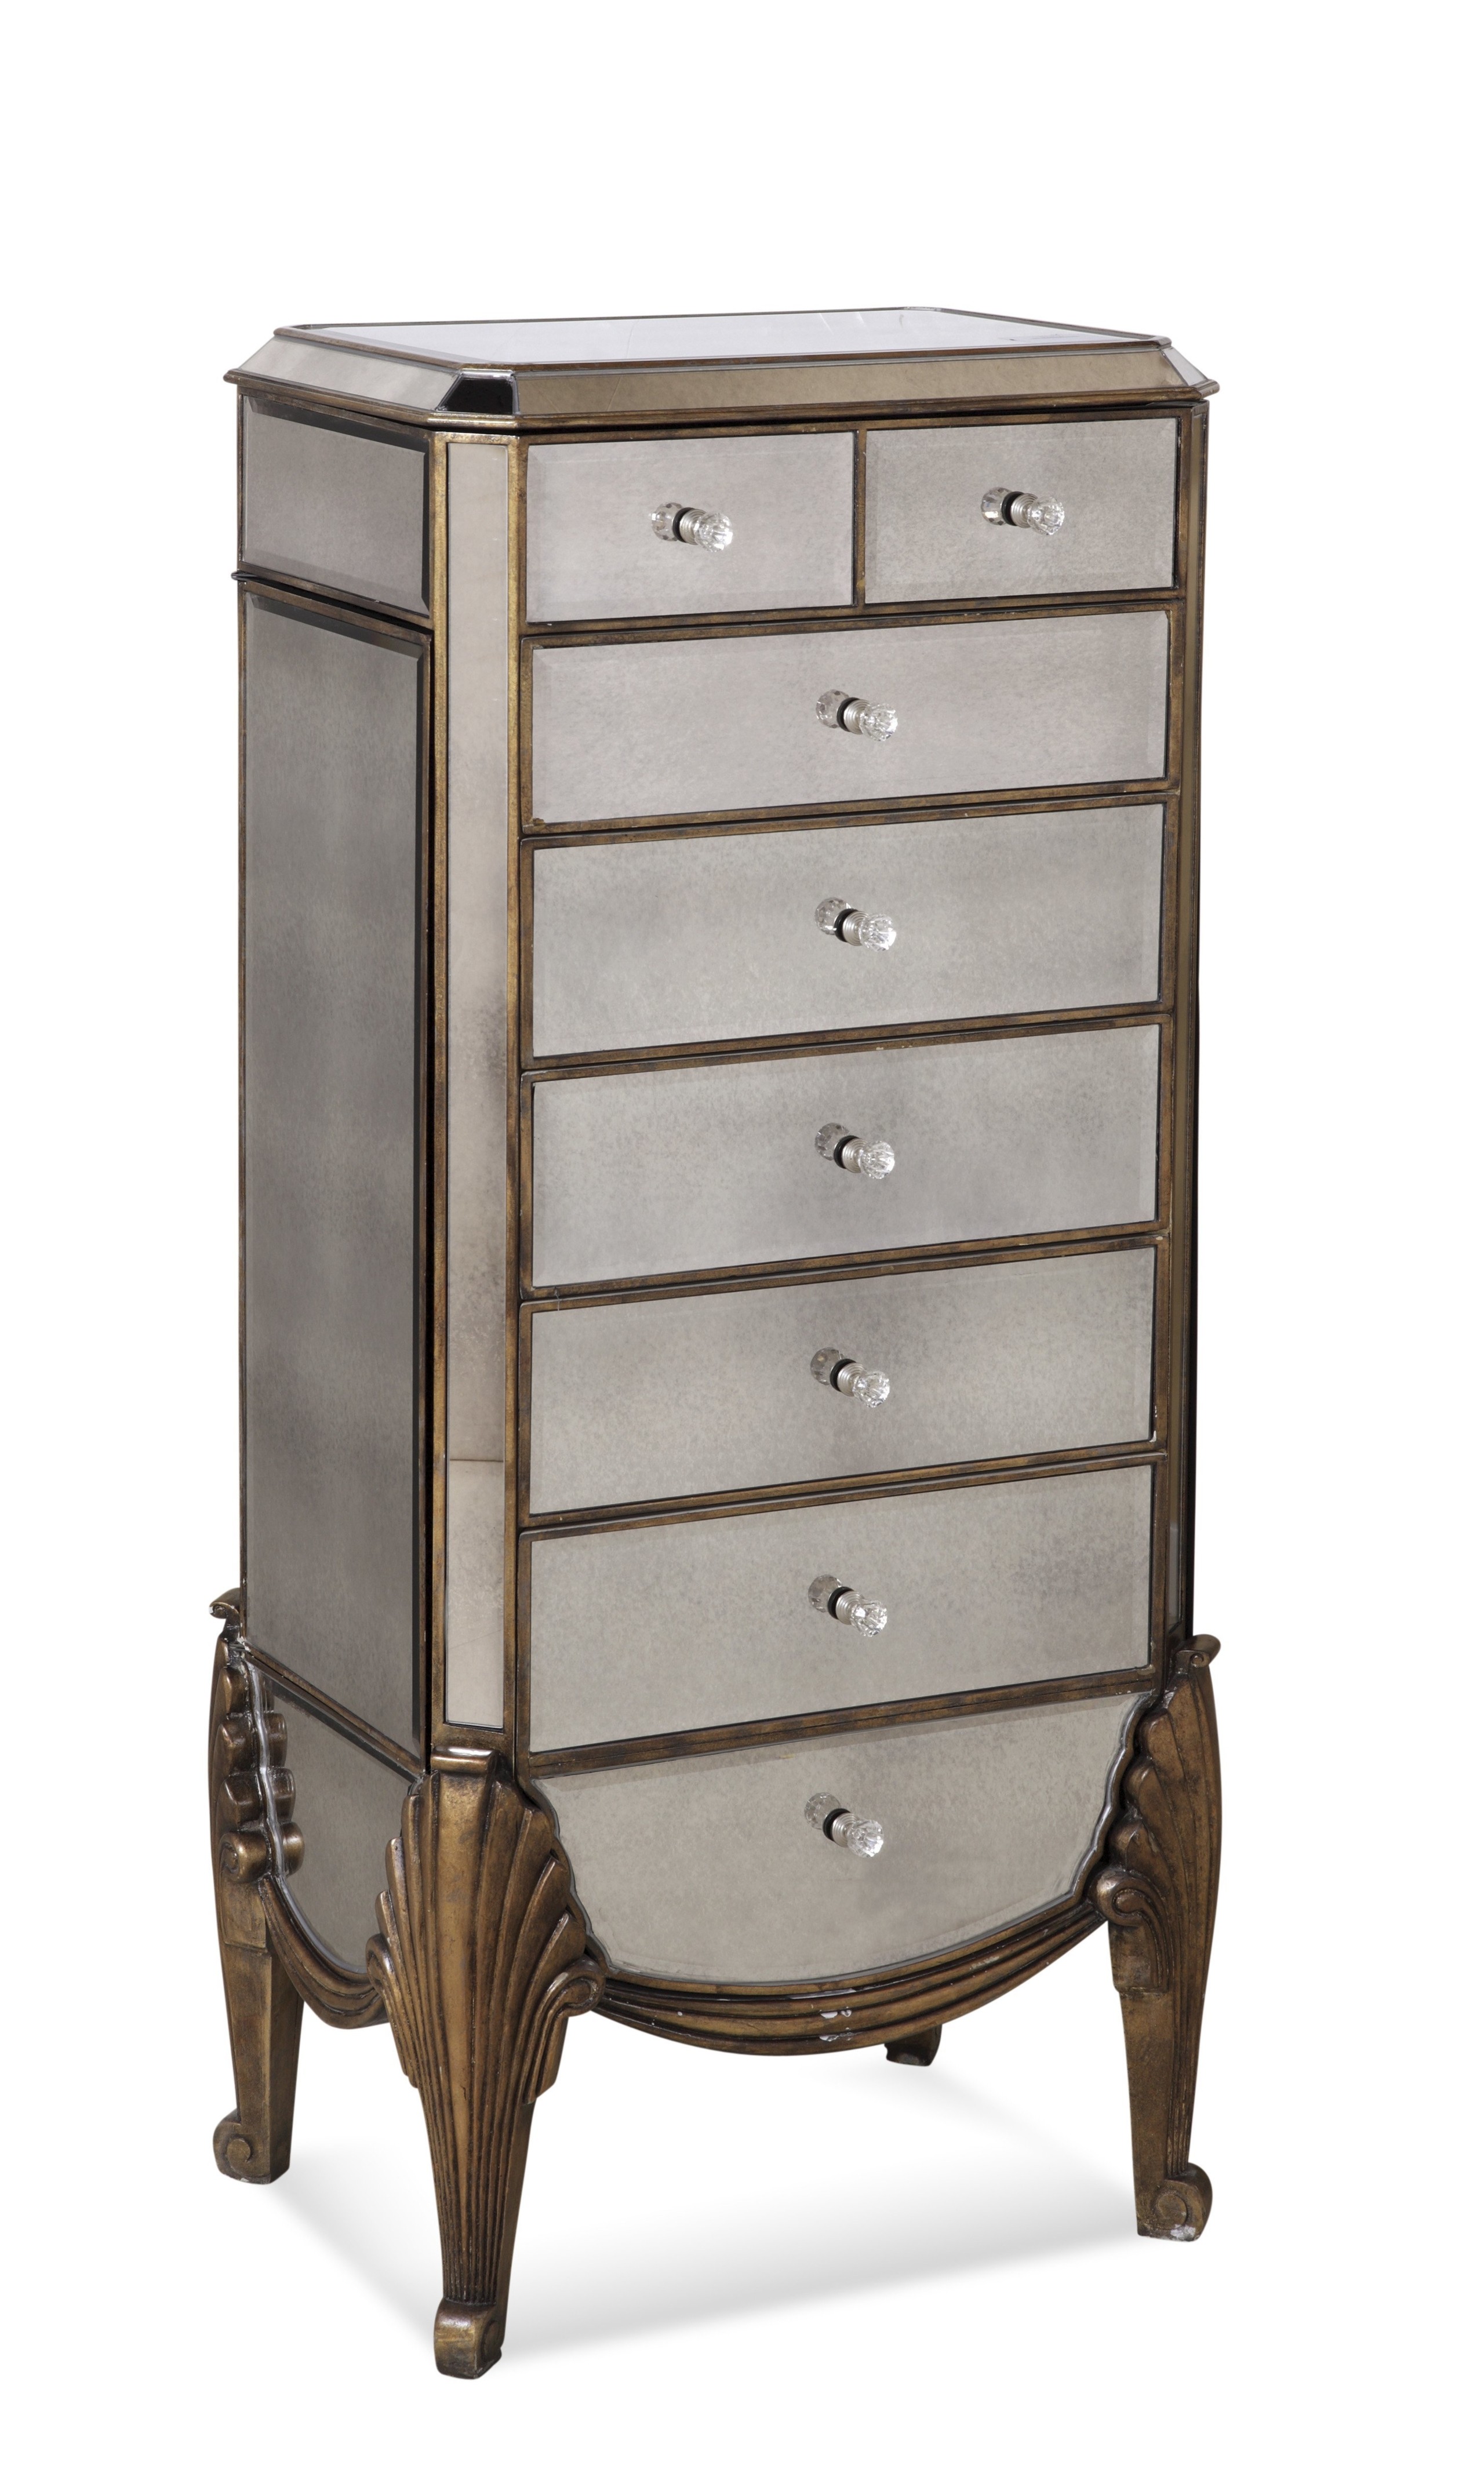 Jewelry armoire solid wood